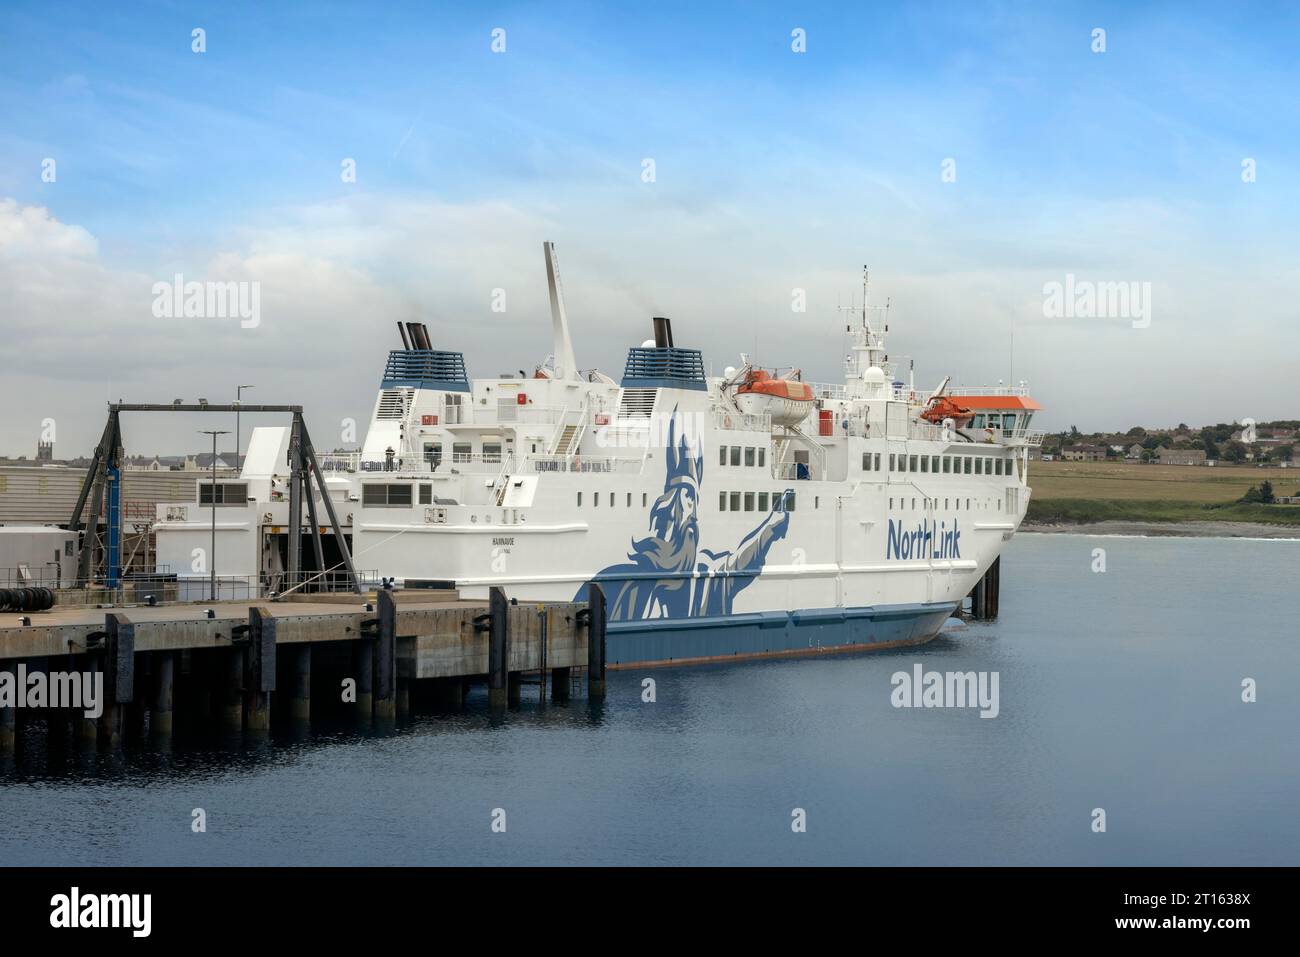 Northlink Ferry to the Orkney Islands from Scrabster, Caithness, Scotland. Stock Photo